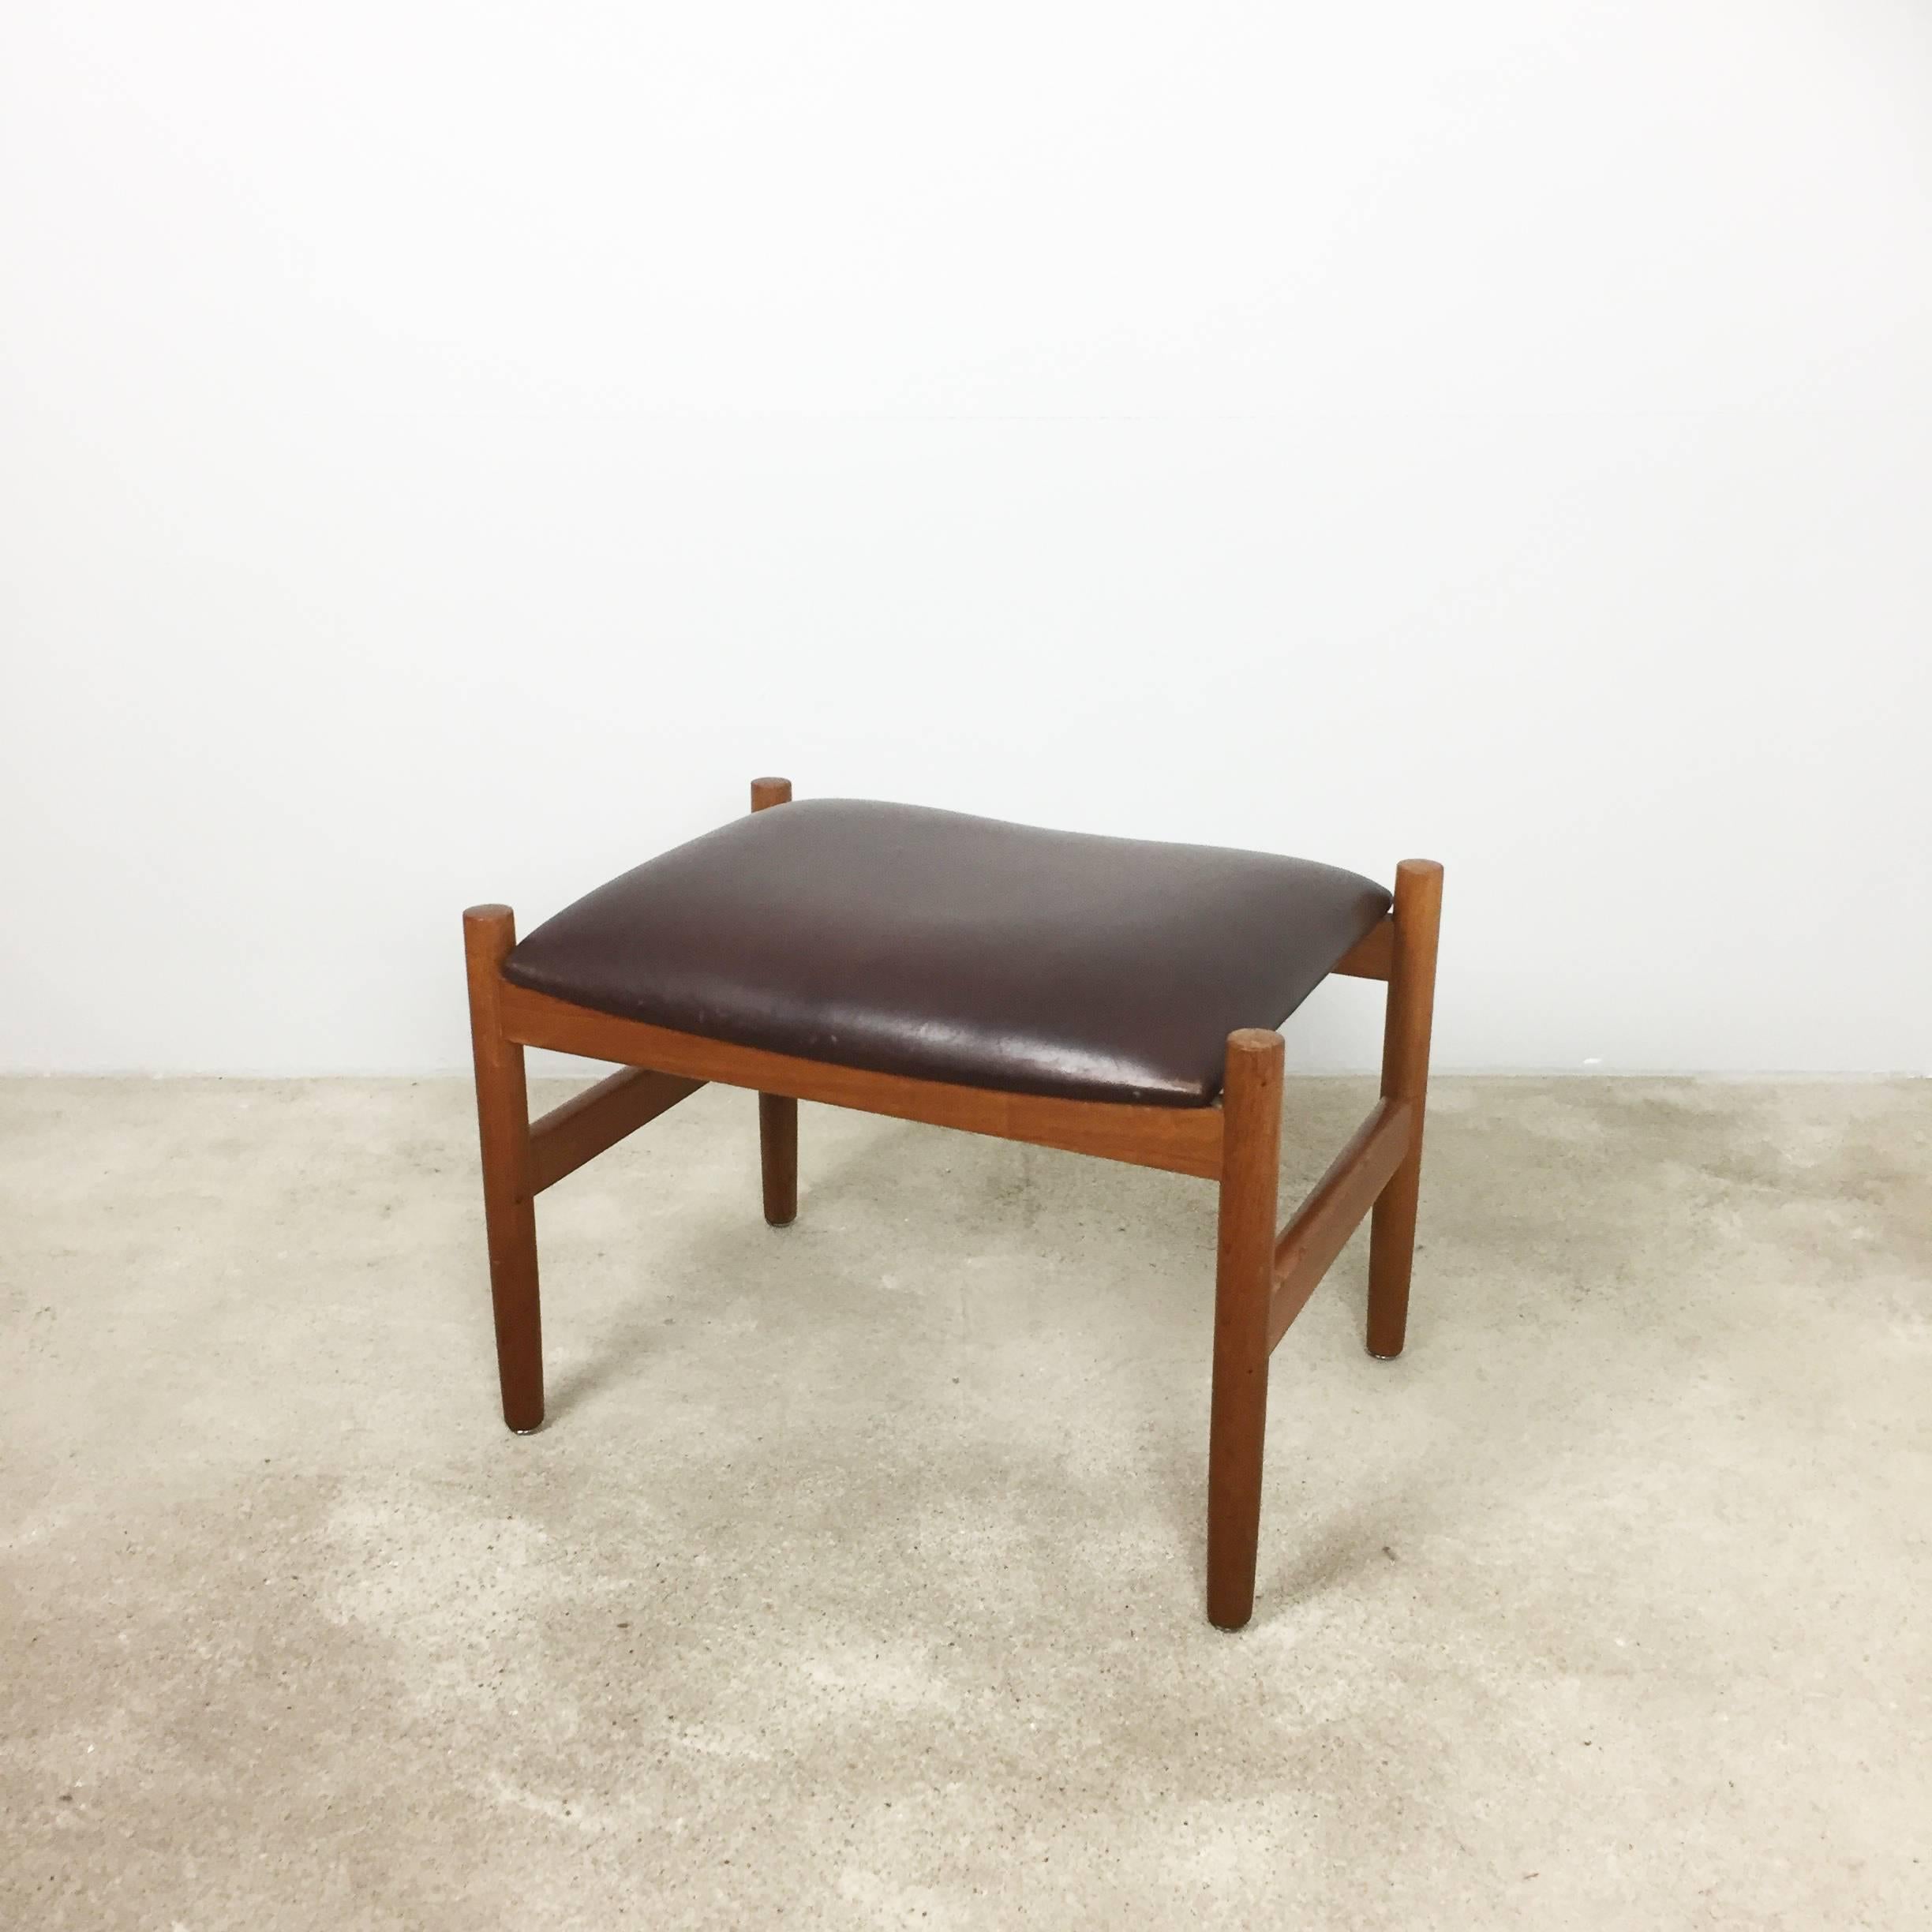 Article:

Teak stool with original brown real leather cover


Producer:

Spottrup, Denmark


Decade:

1960s


Description:

This stool was manufactured in Denmark by Spottrup in the 1960s. It is made from solid oak wood and is